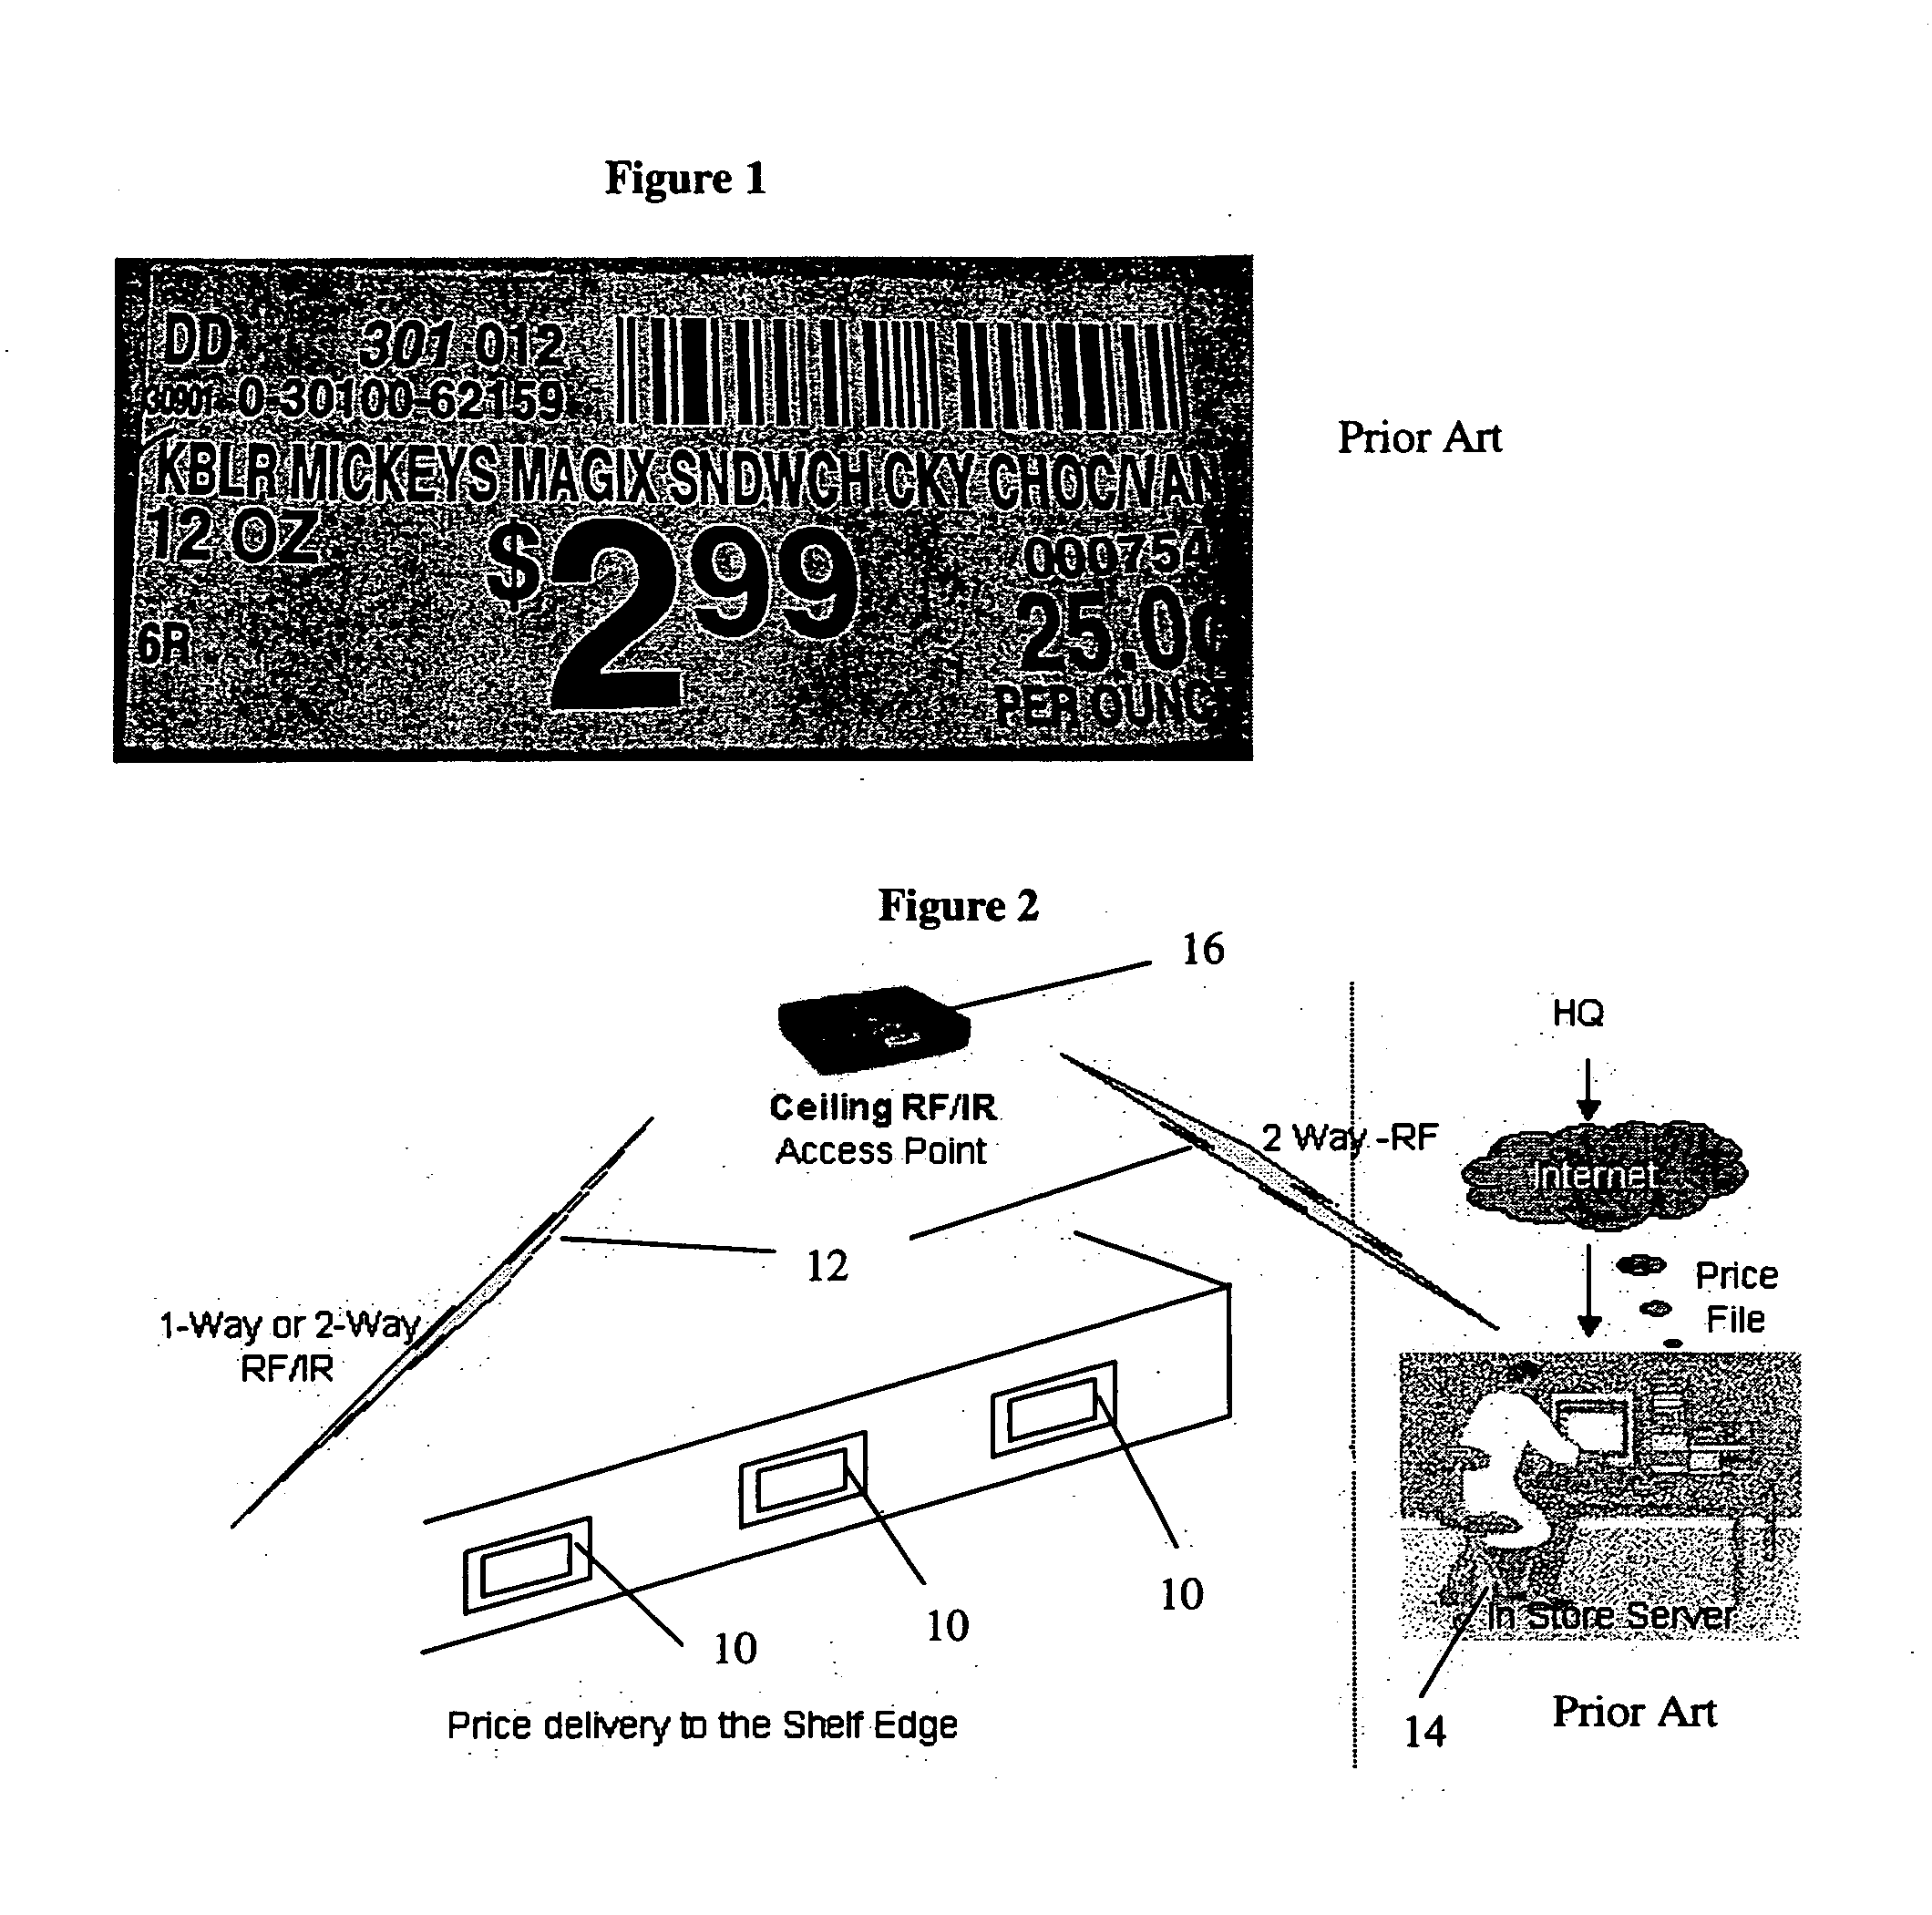 Multi-user wireless display tag infrastructure and methods